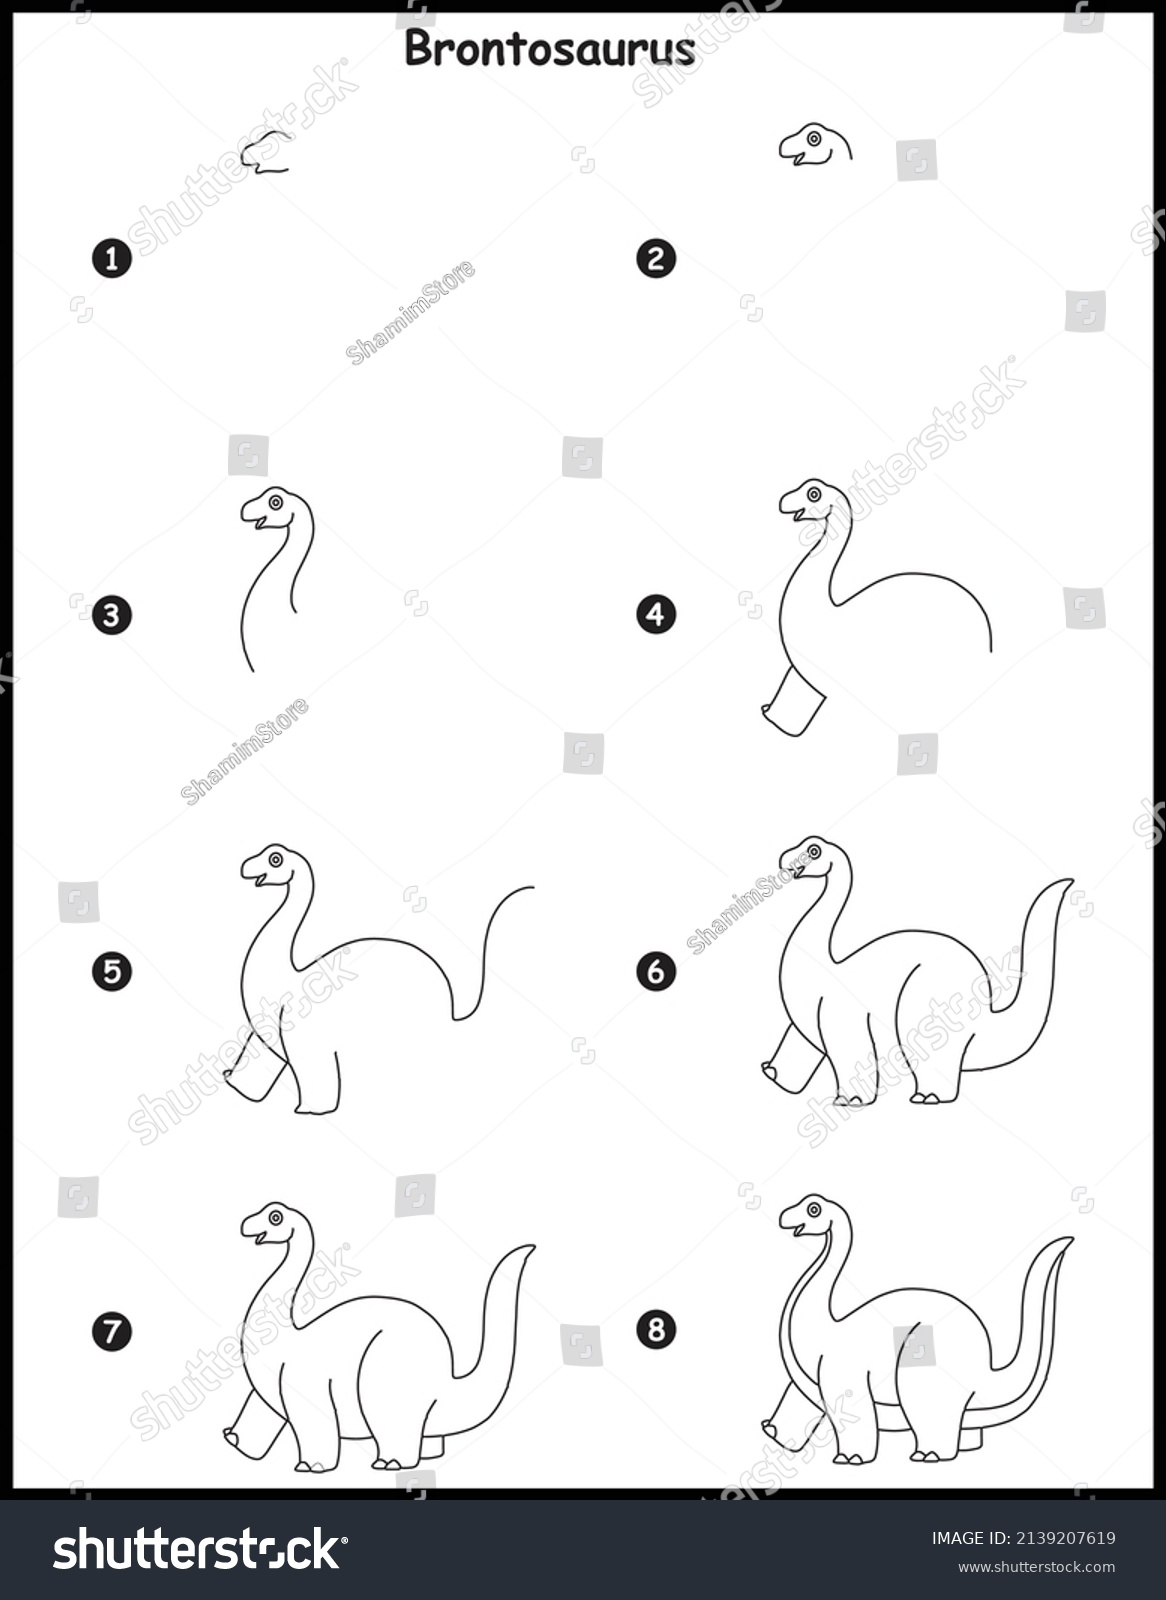 how to draw a hydra step by step